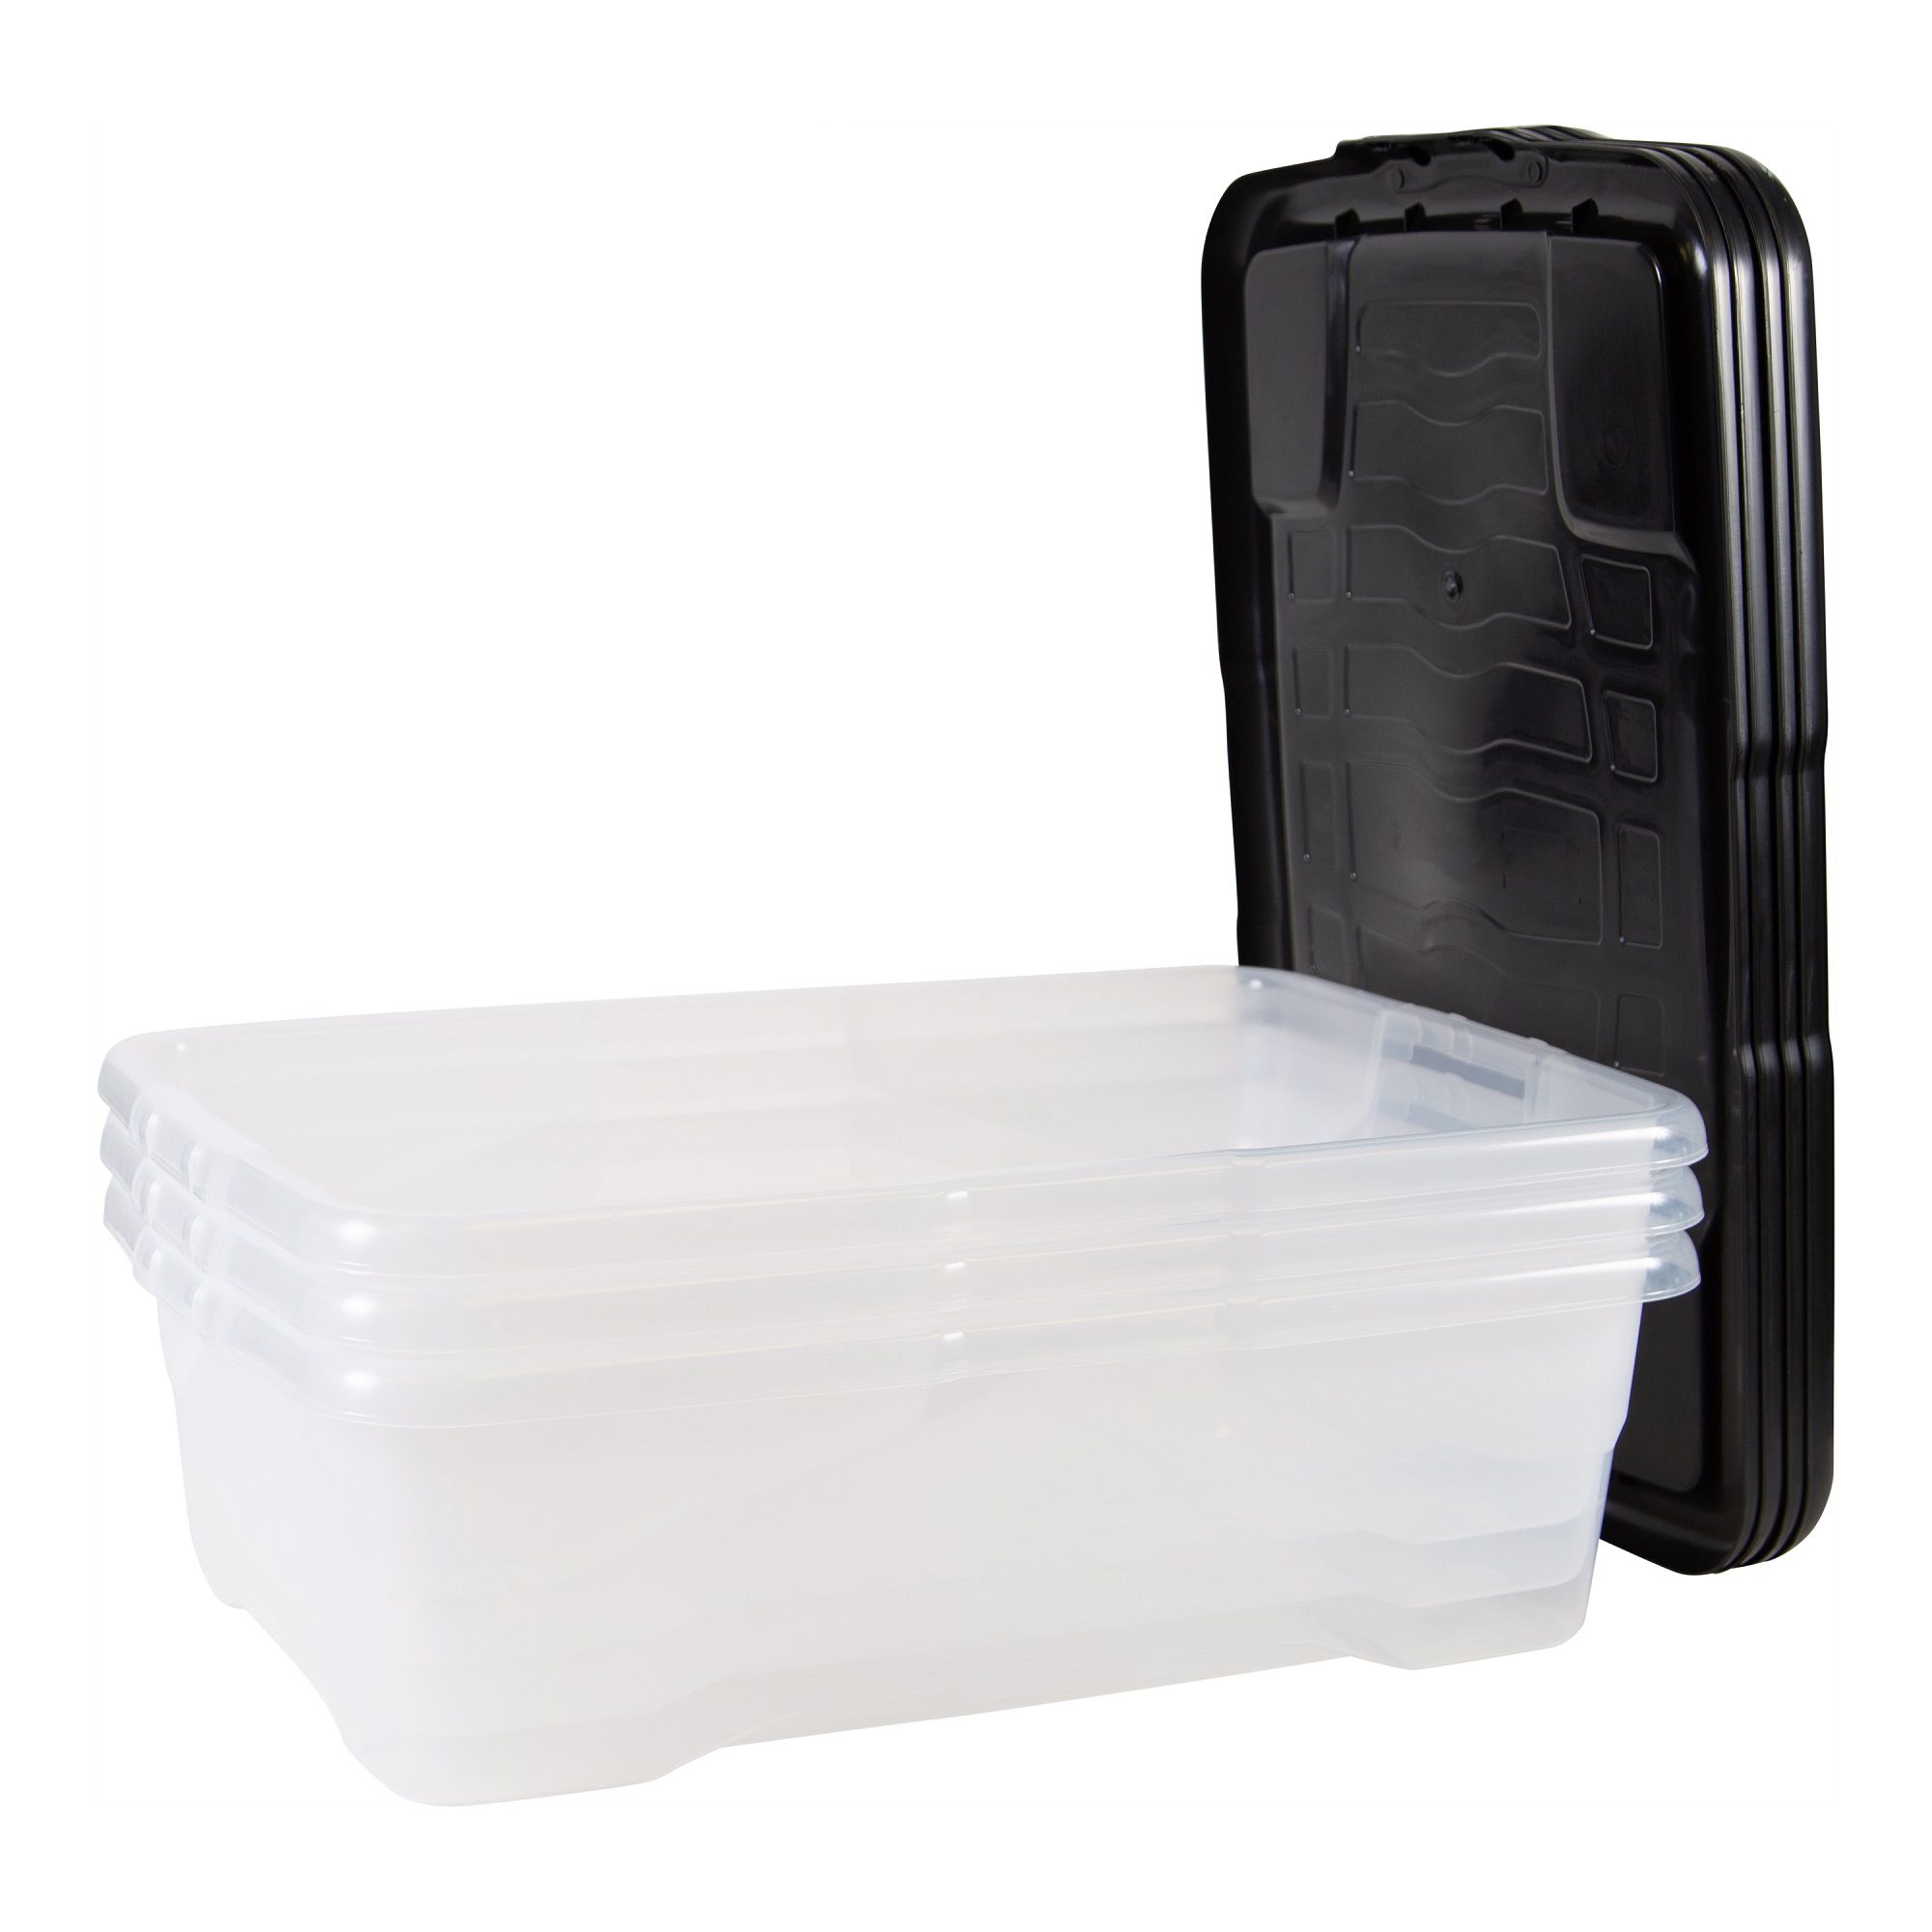 https://kingfisher.scene7.com/is/image/Kingfisher/strata-curve-clear-black-30l-small-stackable-storage-box-lid-pack-of-3~5021711053234_04c_bq?$MOB_PREV$&$width=618&$height=618